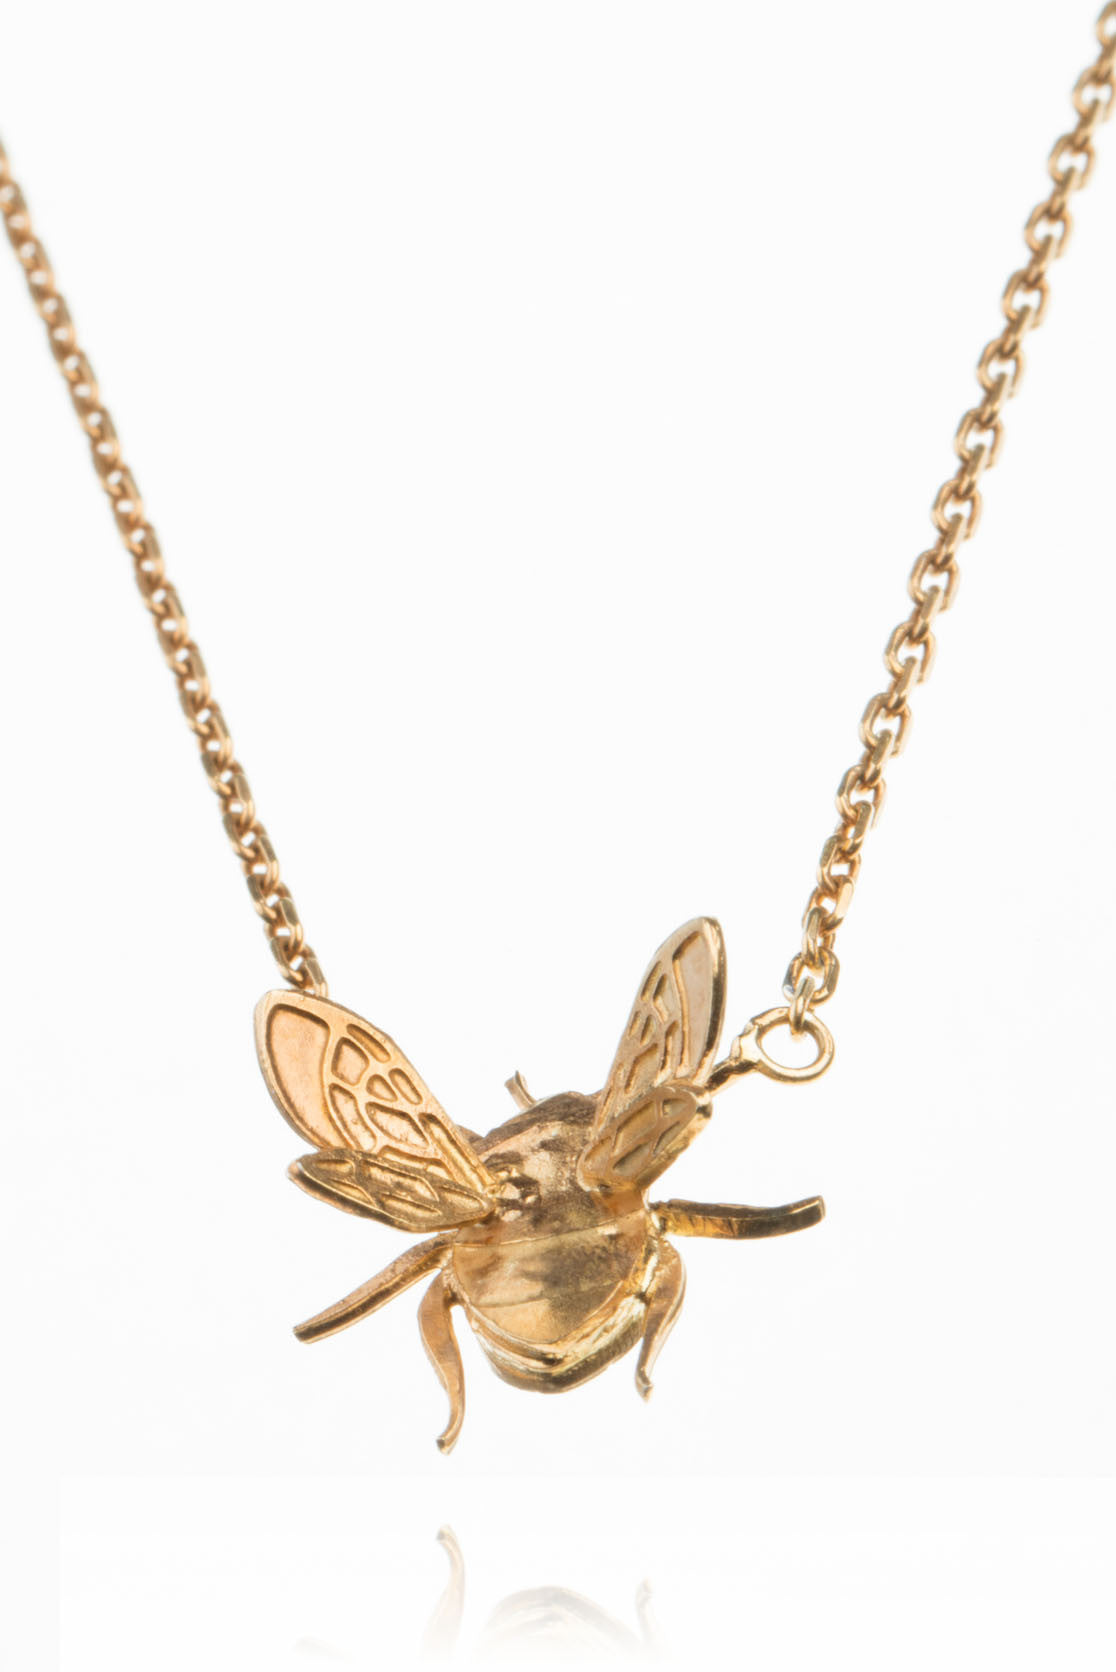 Bee Necklace in Sterling Silver or Gold